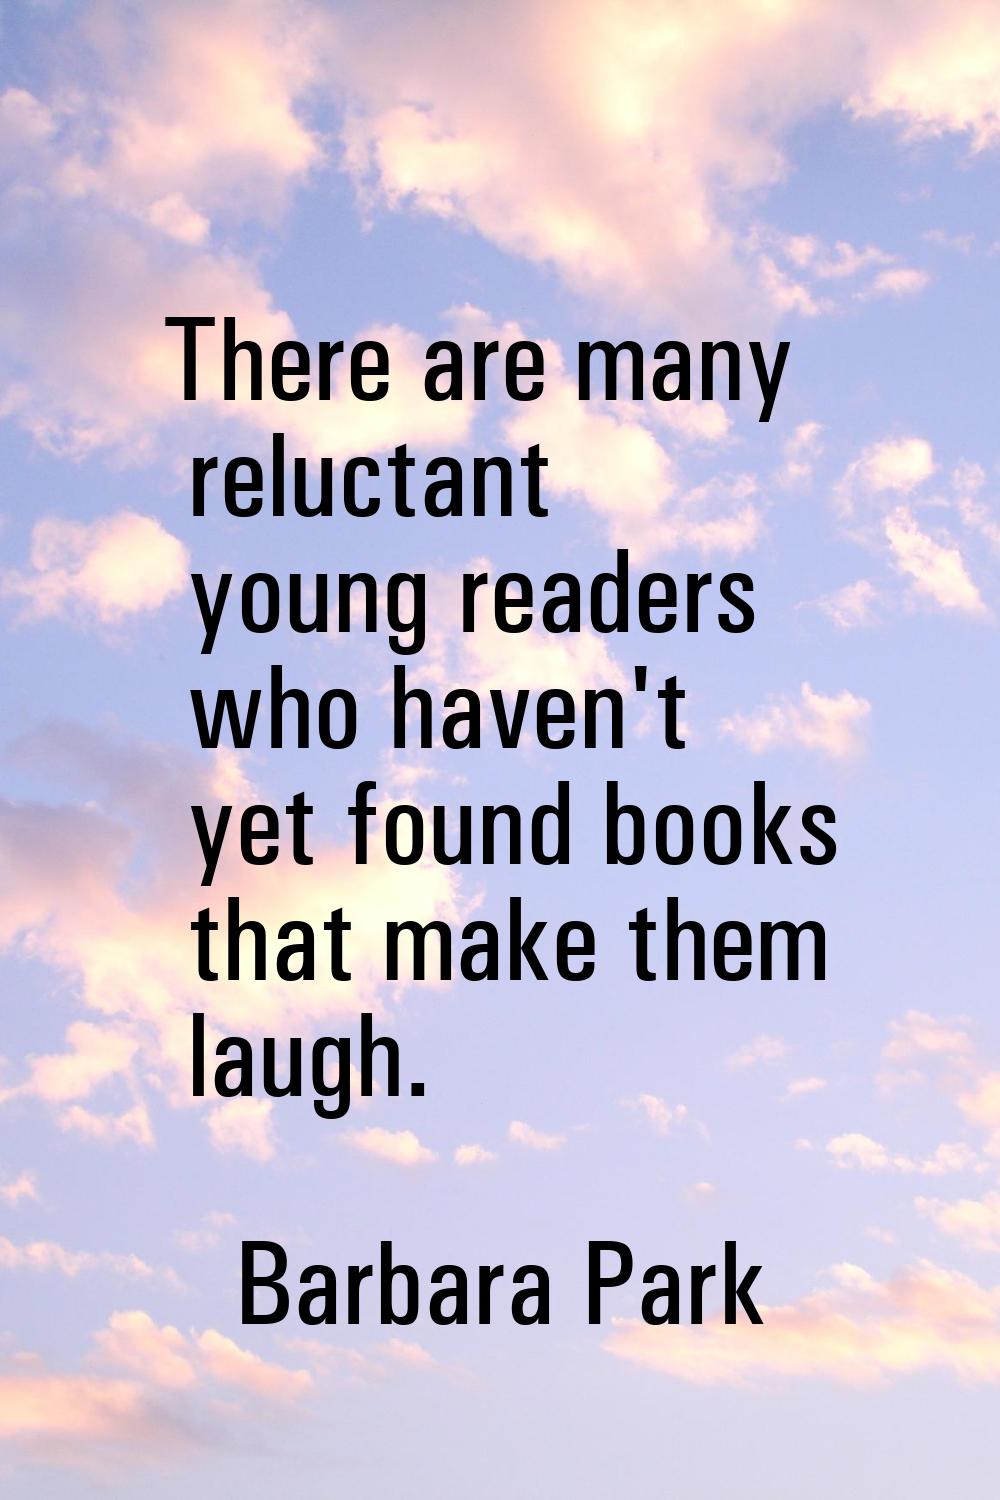 There are many reluctant young readers who haven't yet found books that make them laugh.